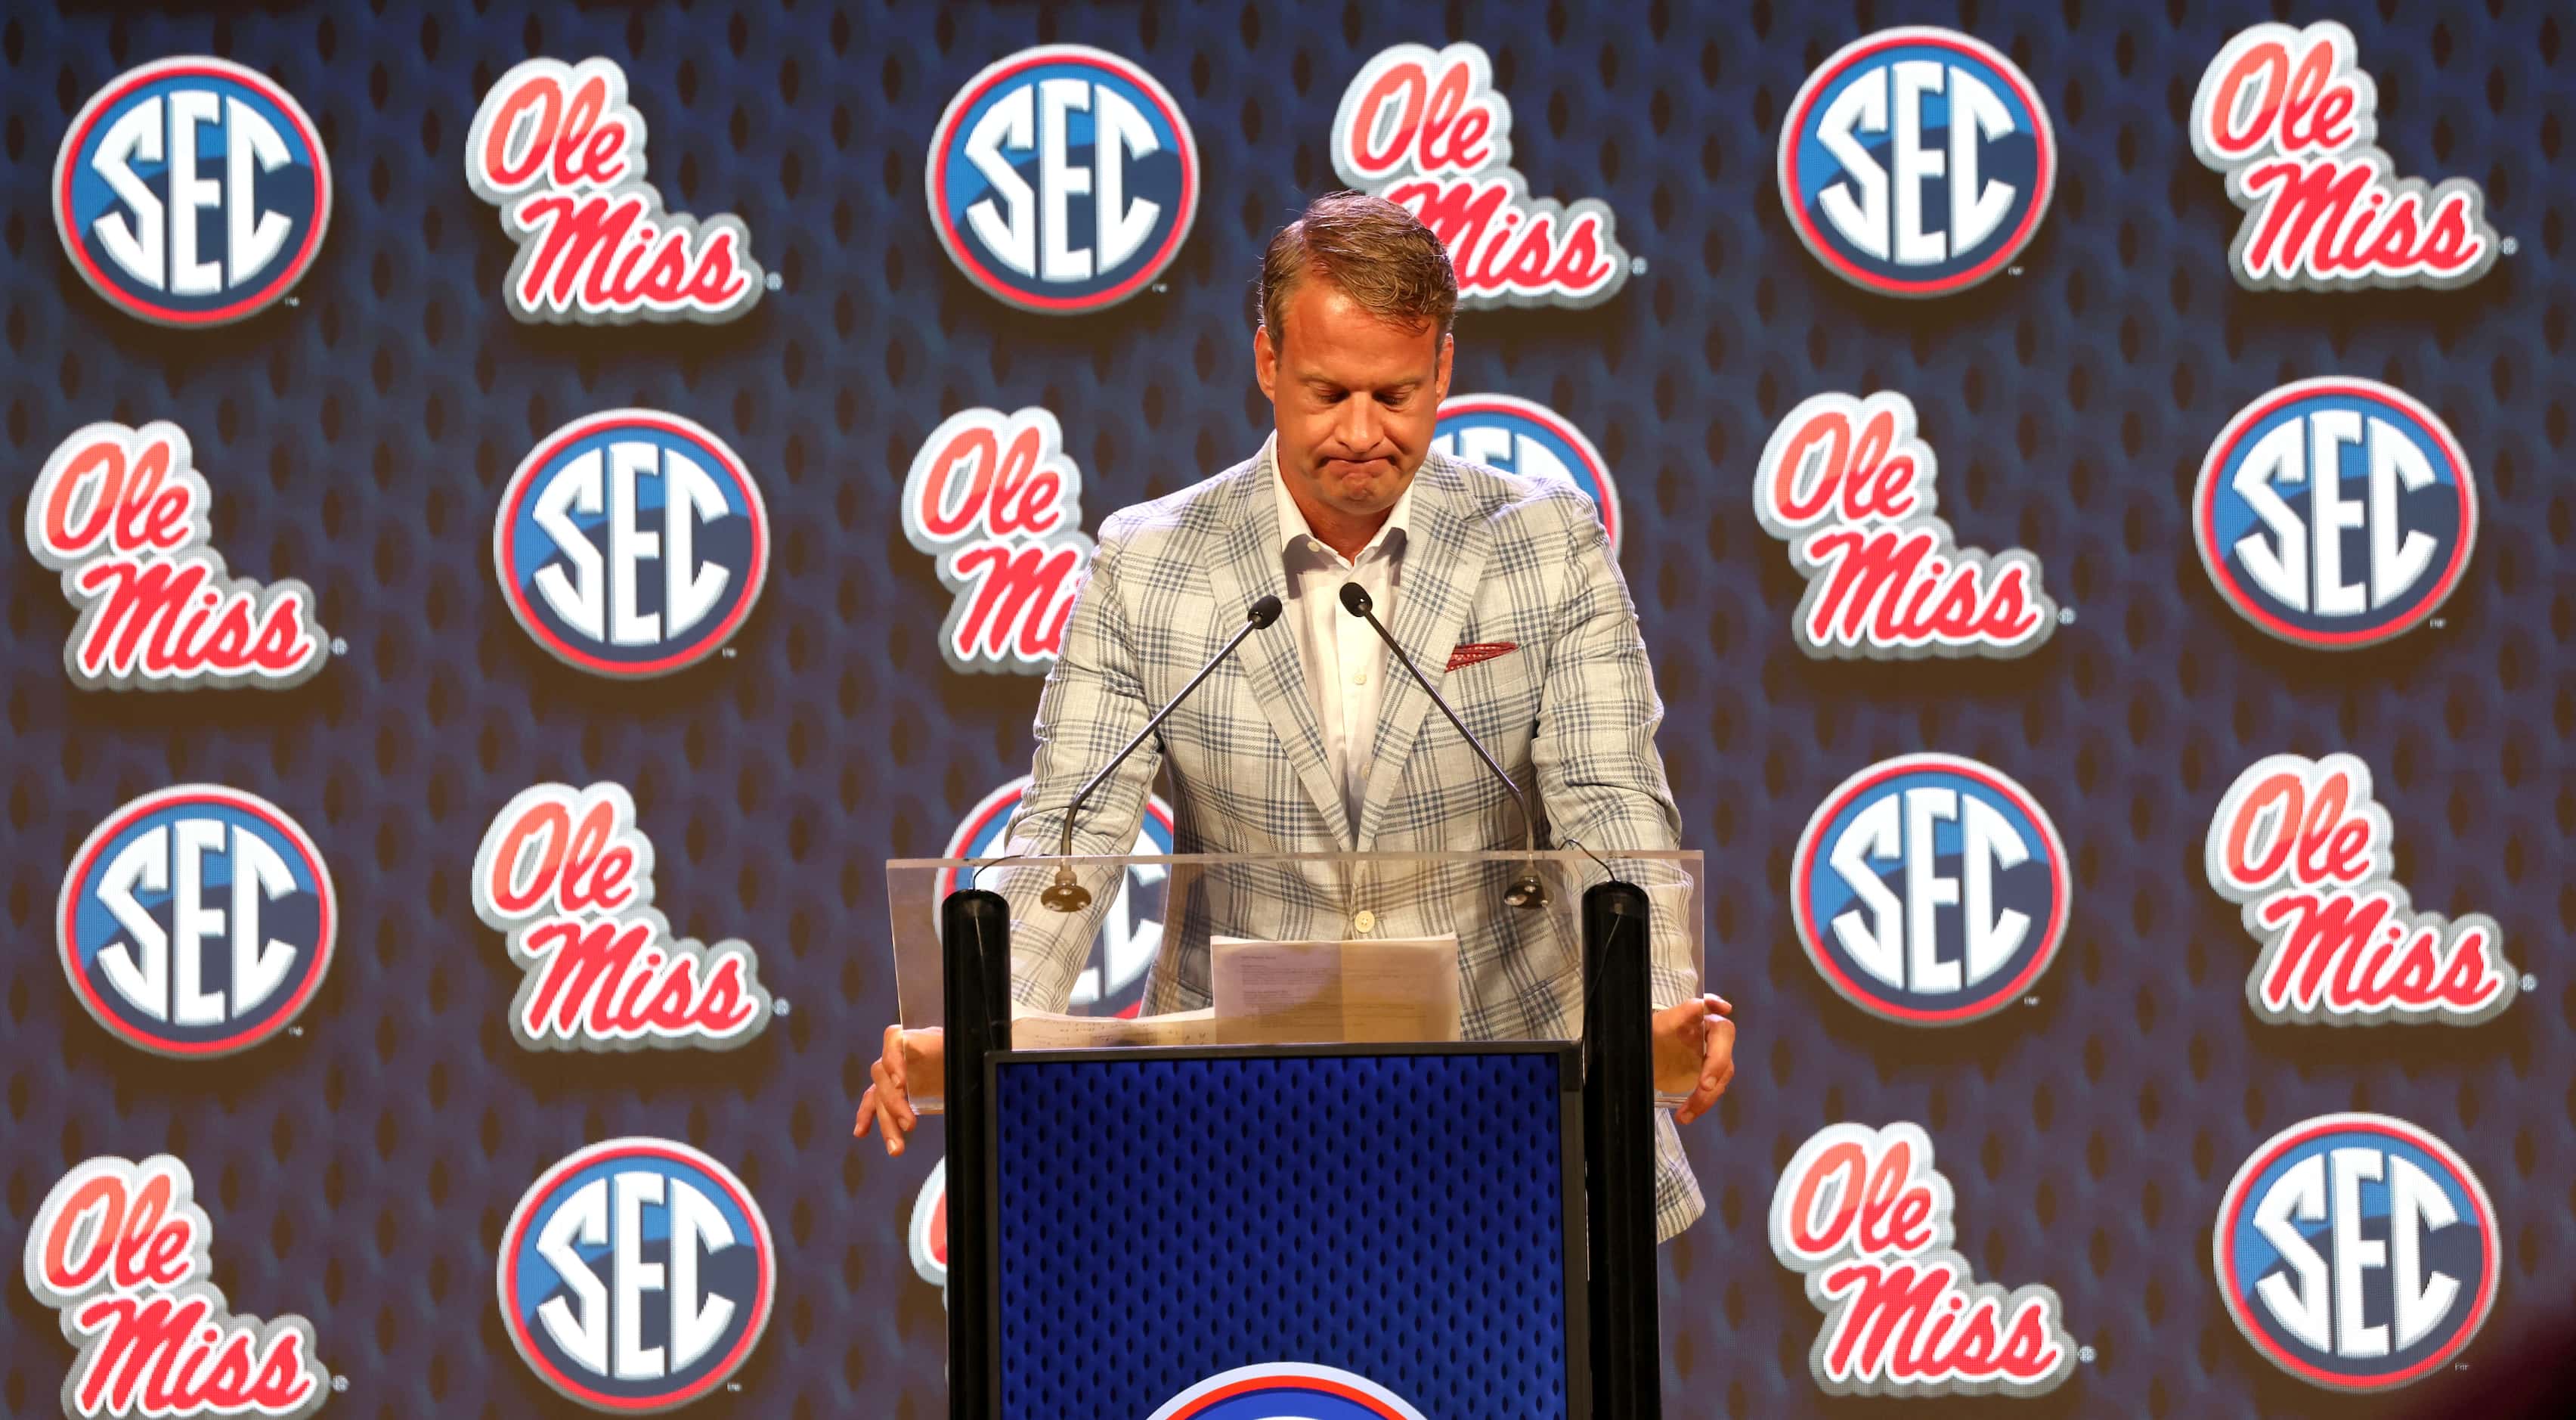 Lane Kiffin, head coach of the Ole Miss Football team, pauses at the podium after sharing...